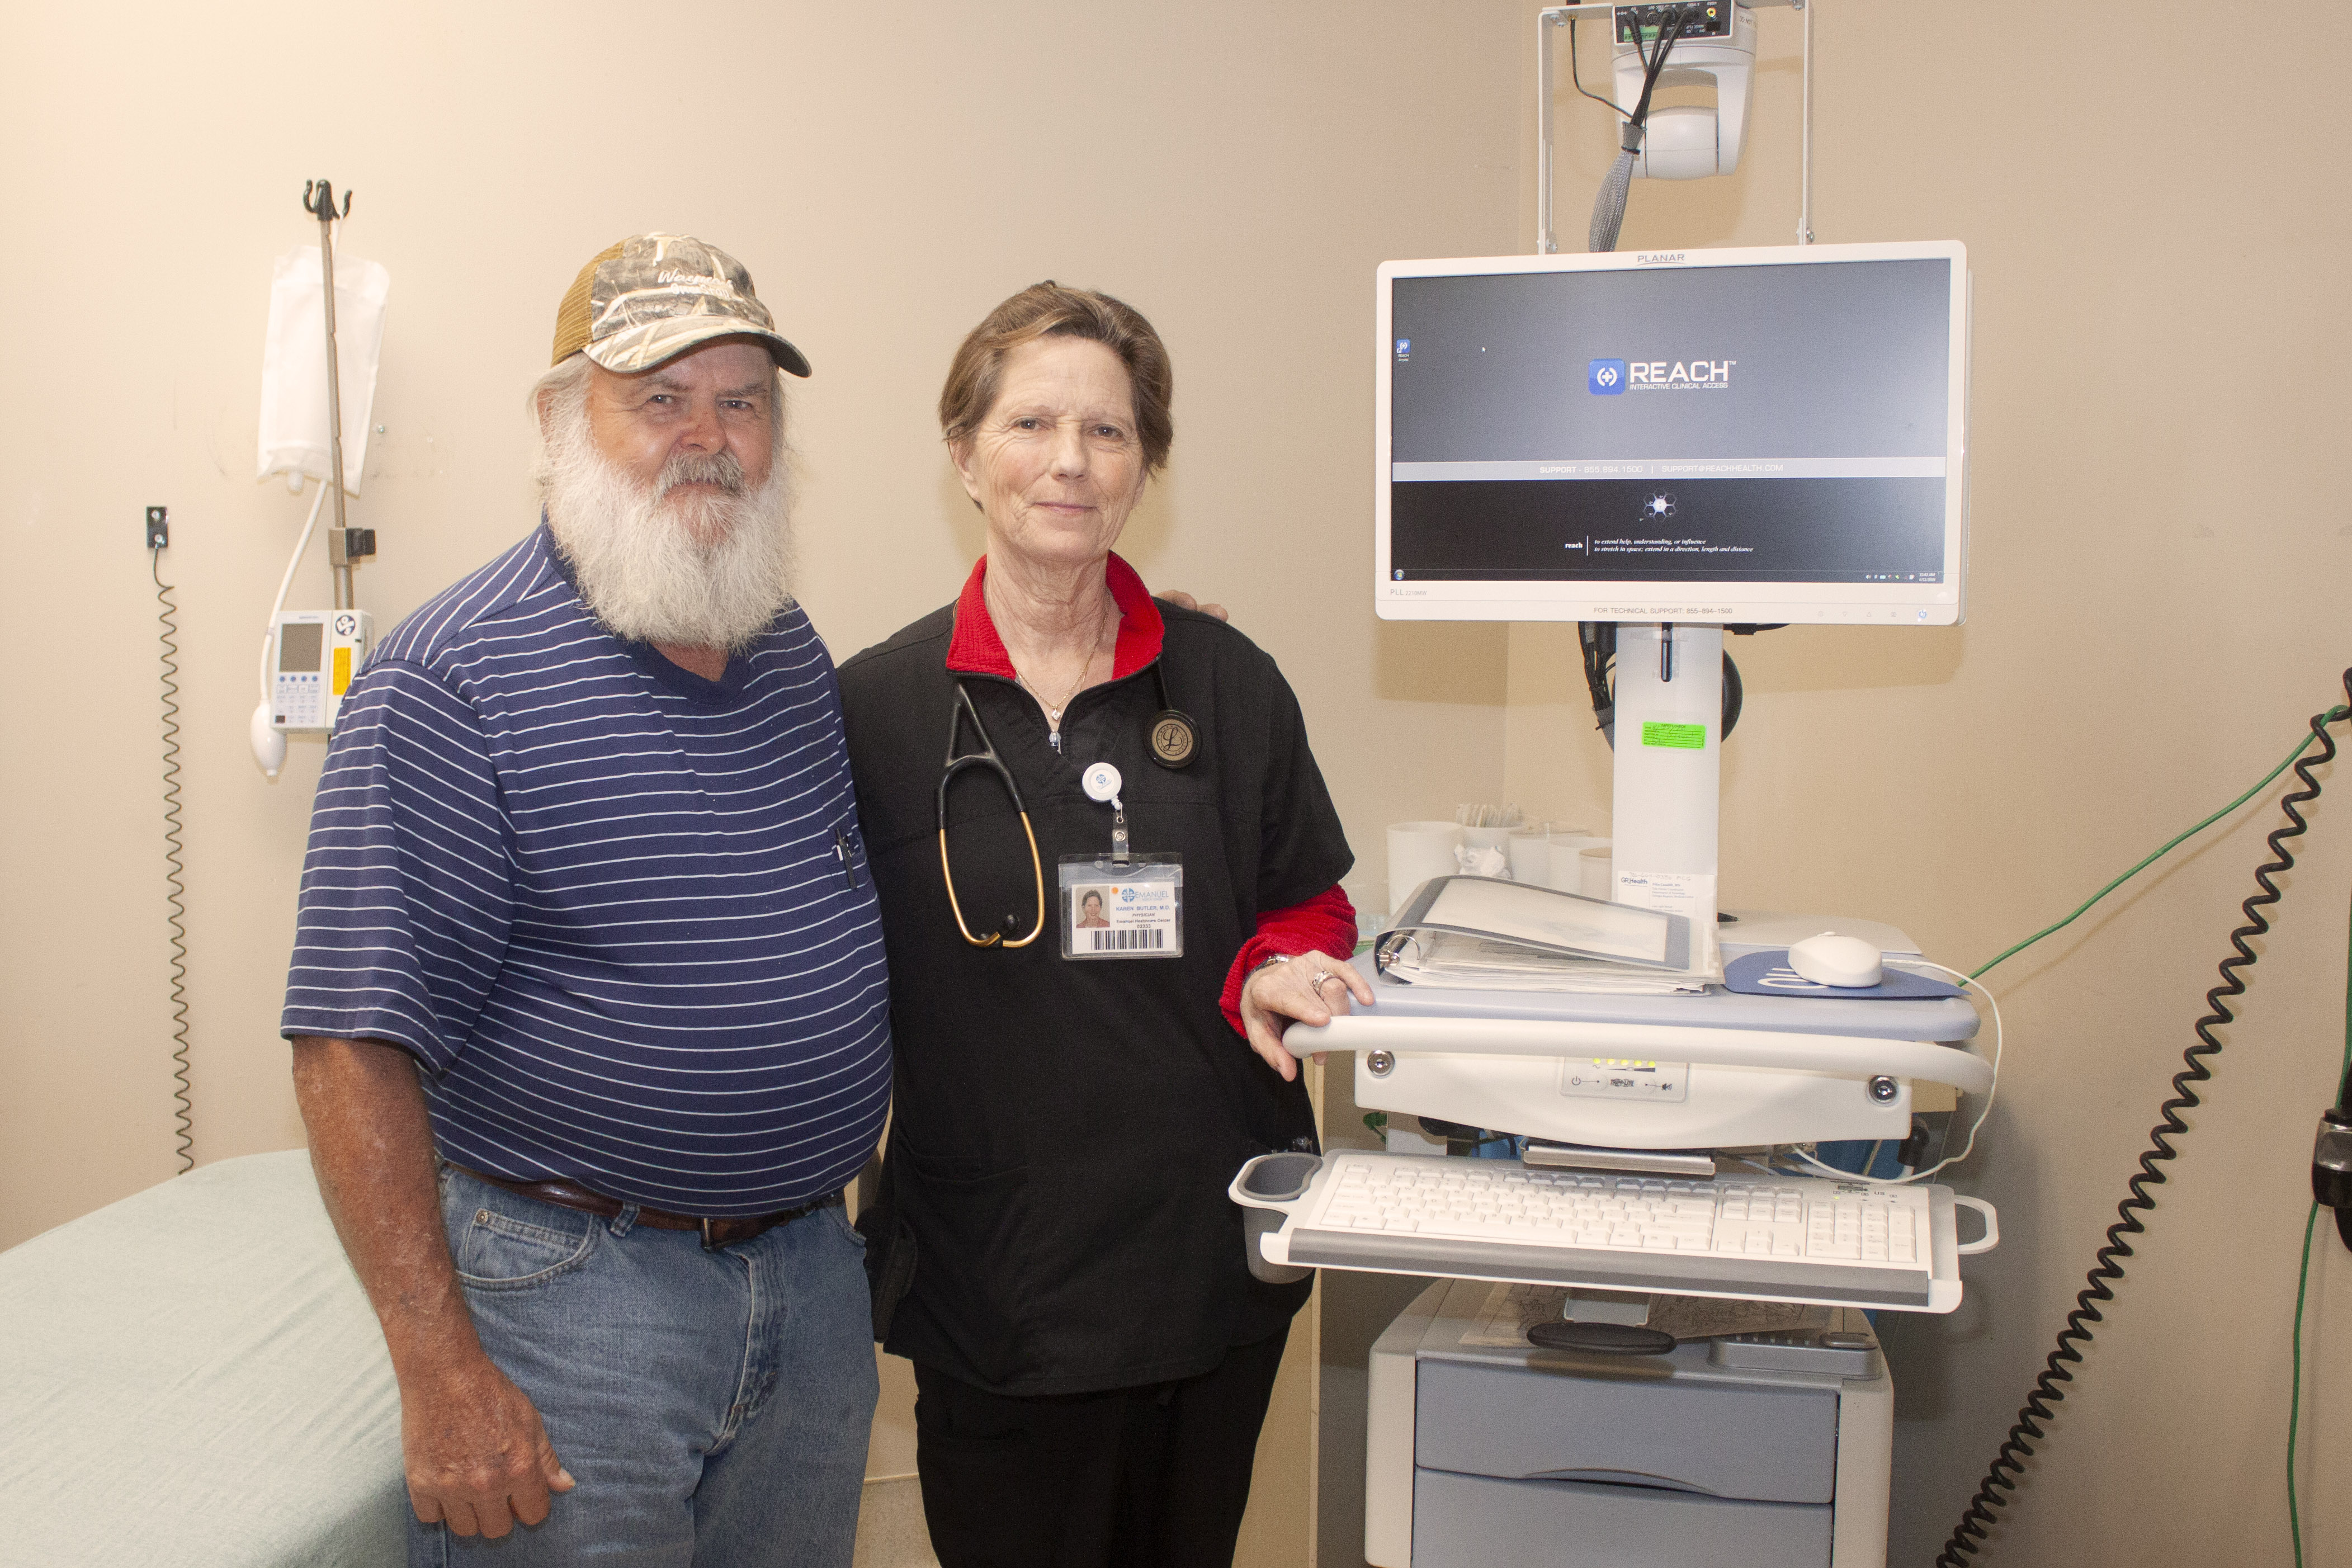 Through telemedicine, rural areas benefit from on-call stroke experts